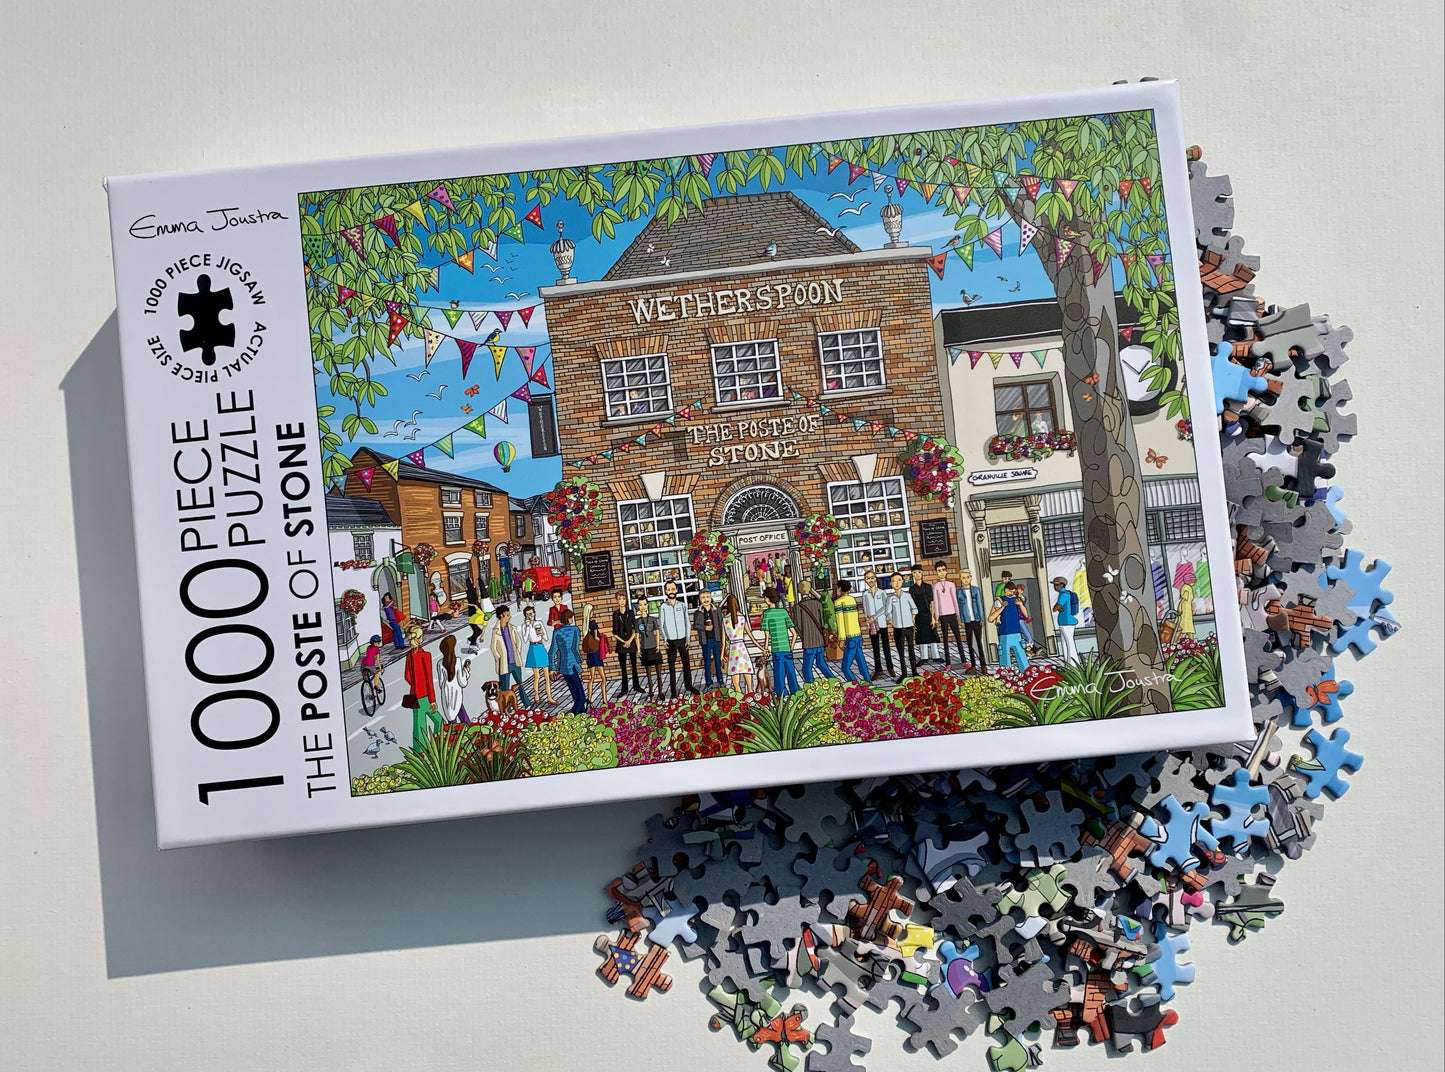 The Poste of Stone 1,000 piece jigsaw puzzle